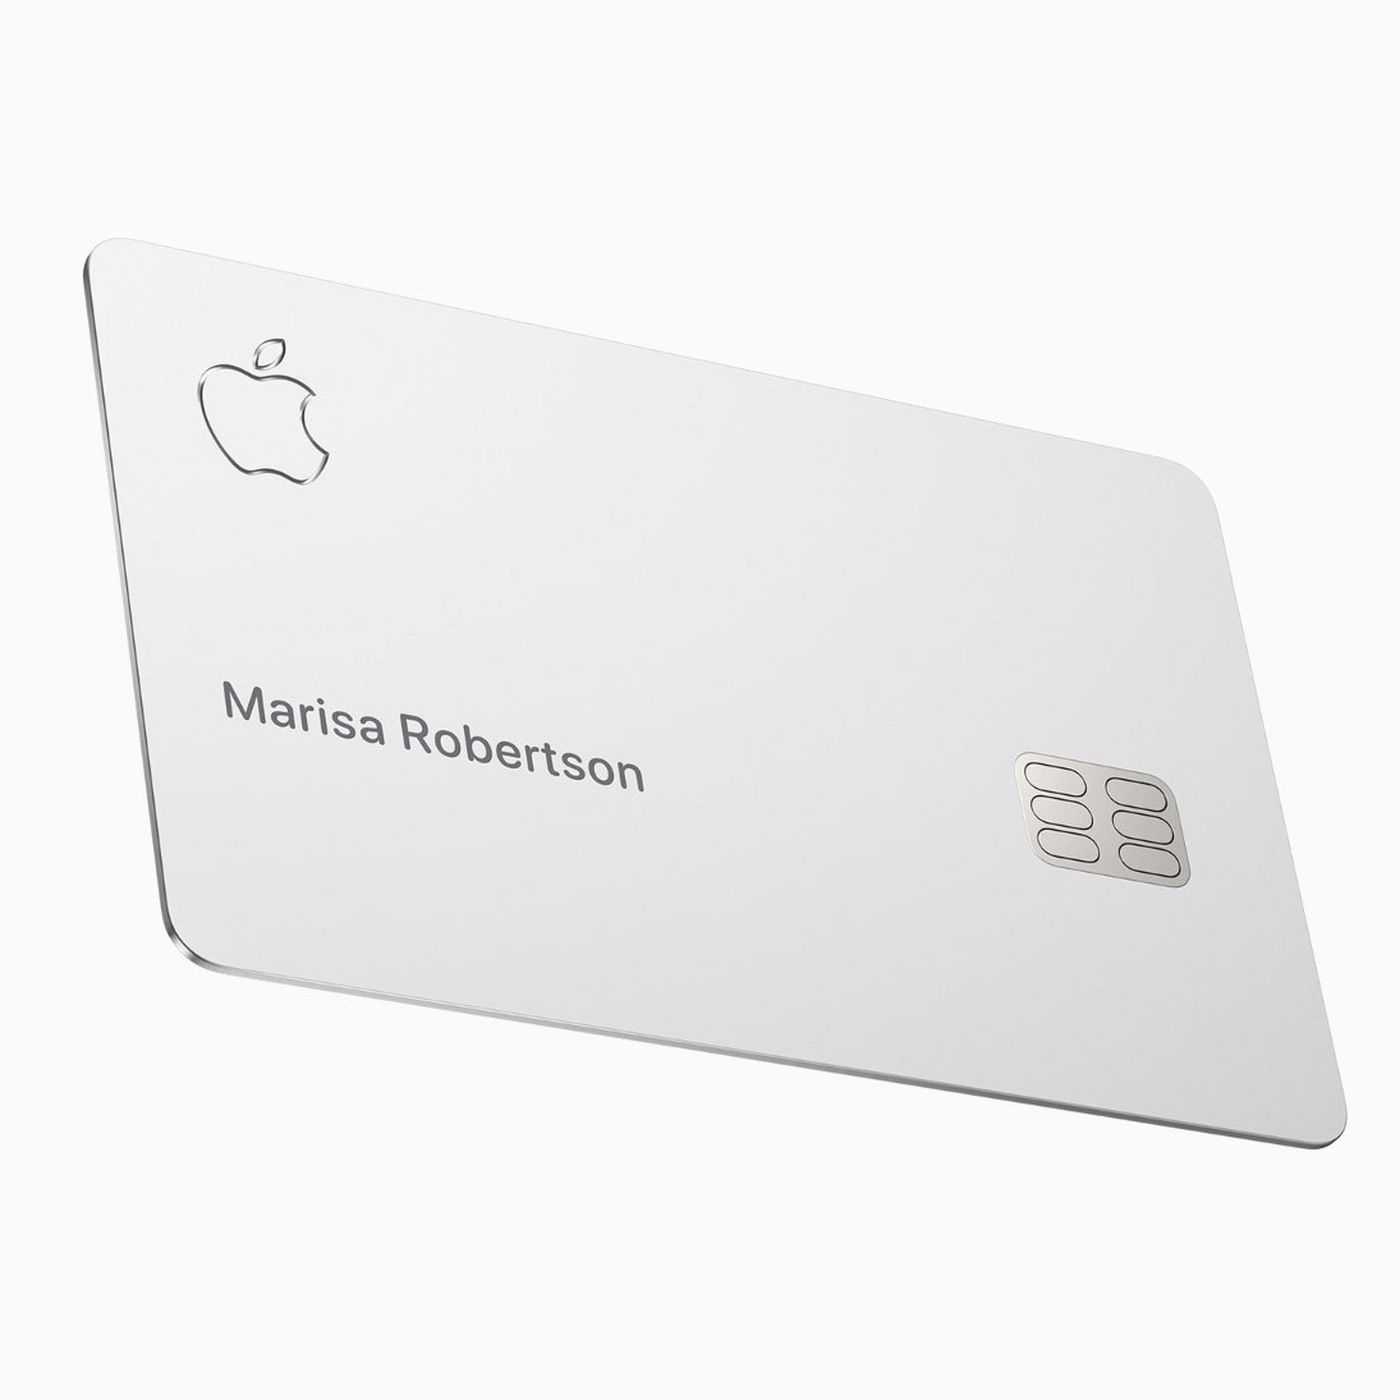 Apple Card: Apple's Thinnest And Lightest Status Symbol Ever With Paul Allen Business Card Template